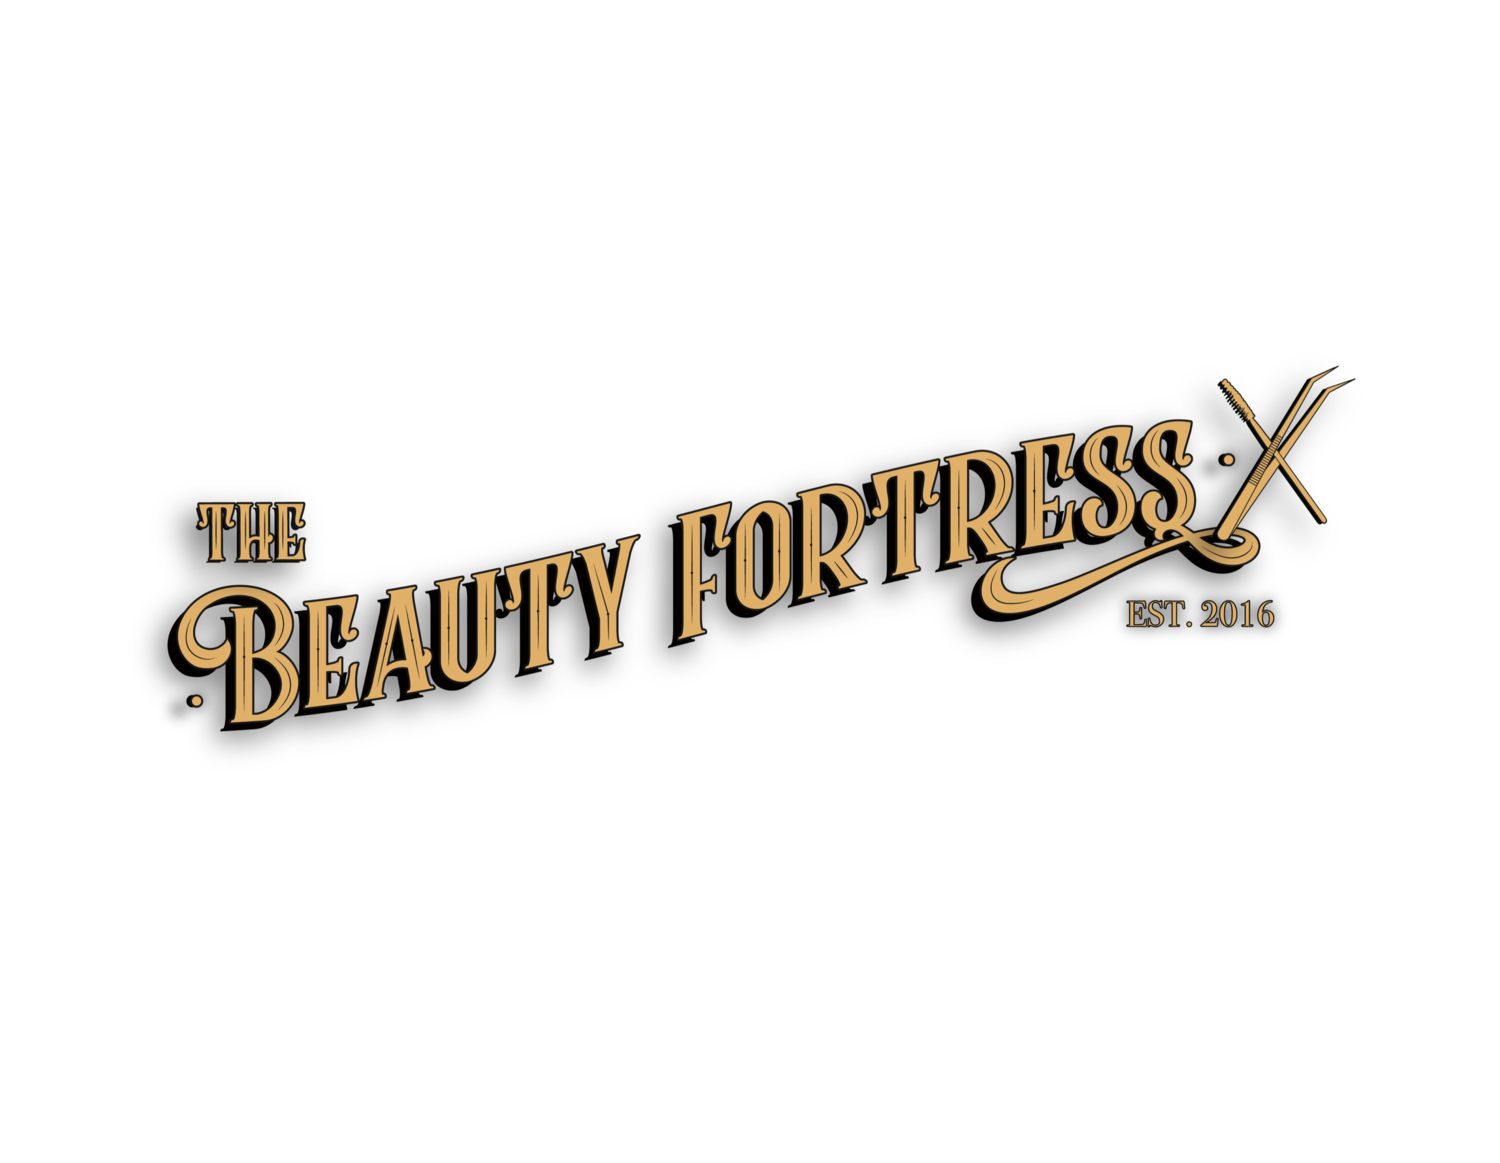 The Beauty Fortress